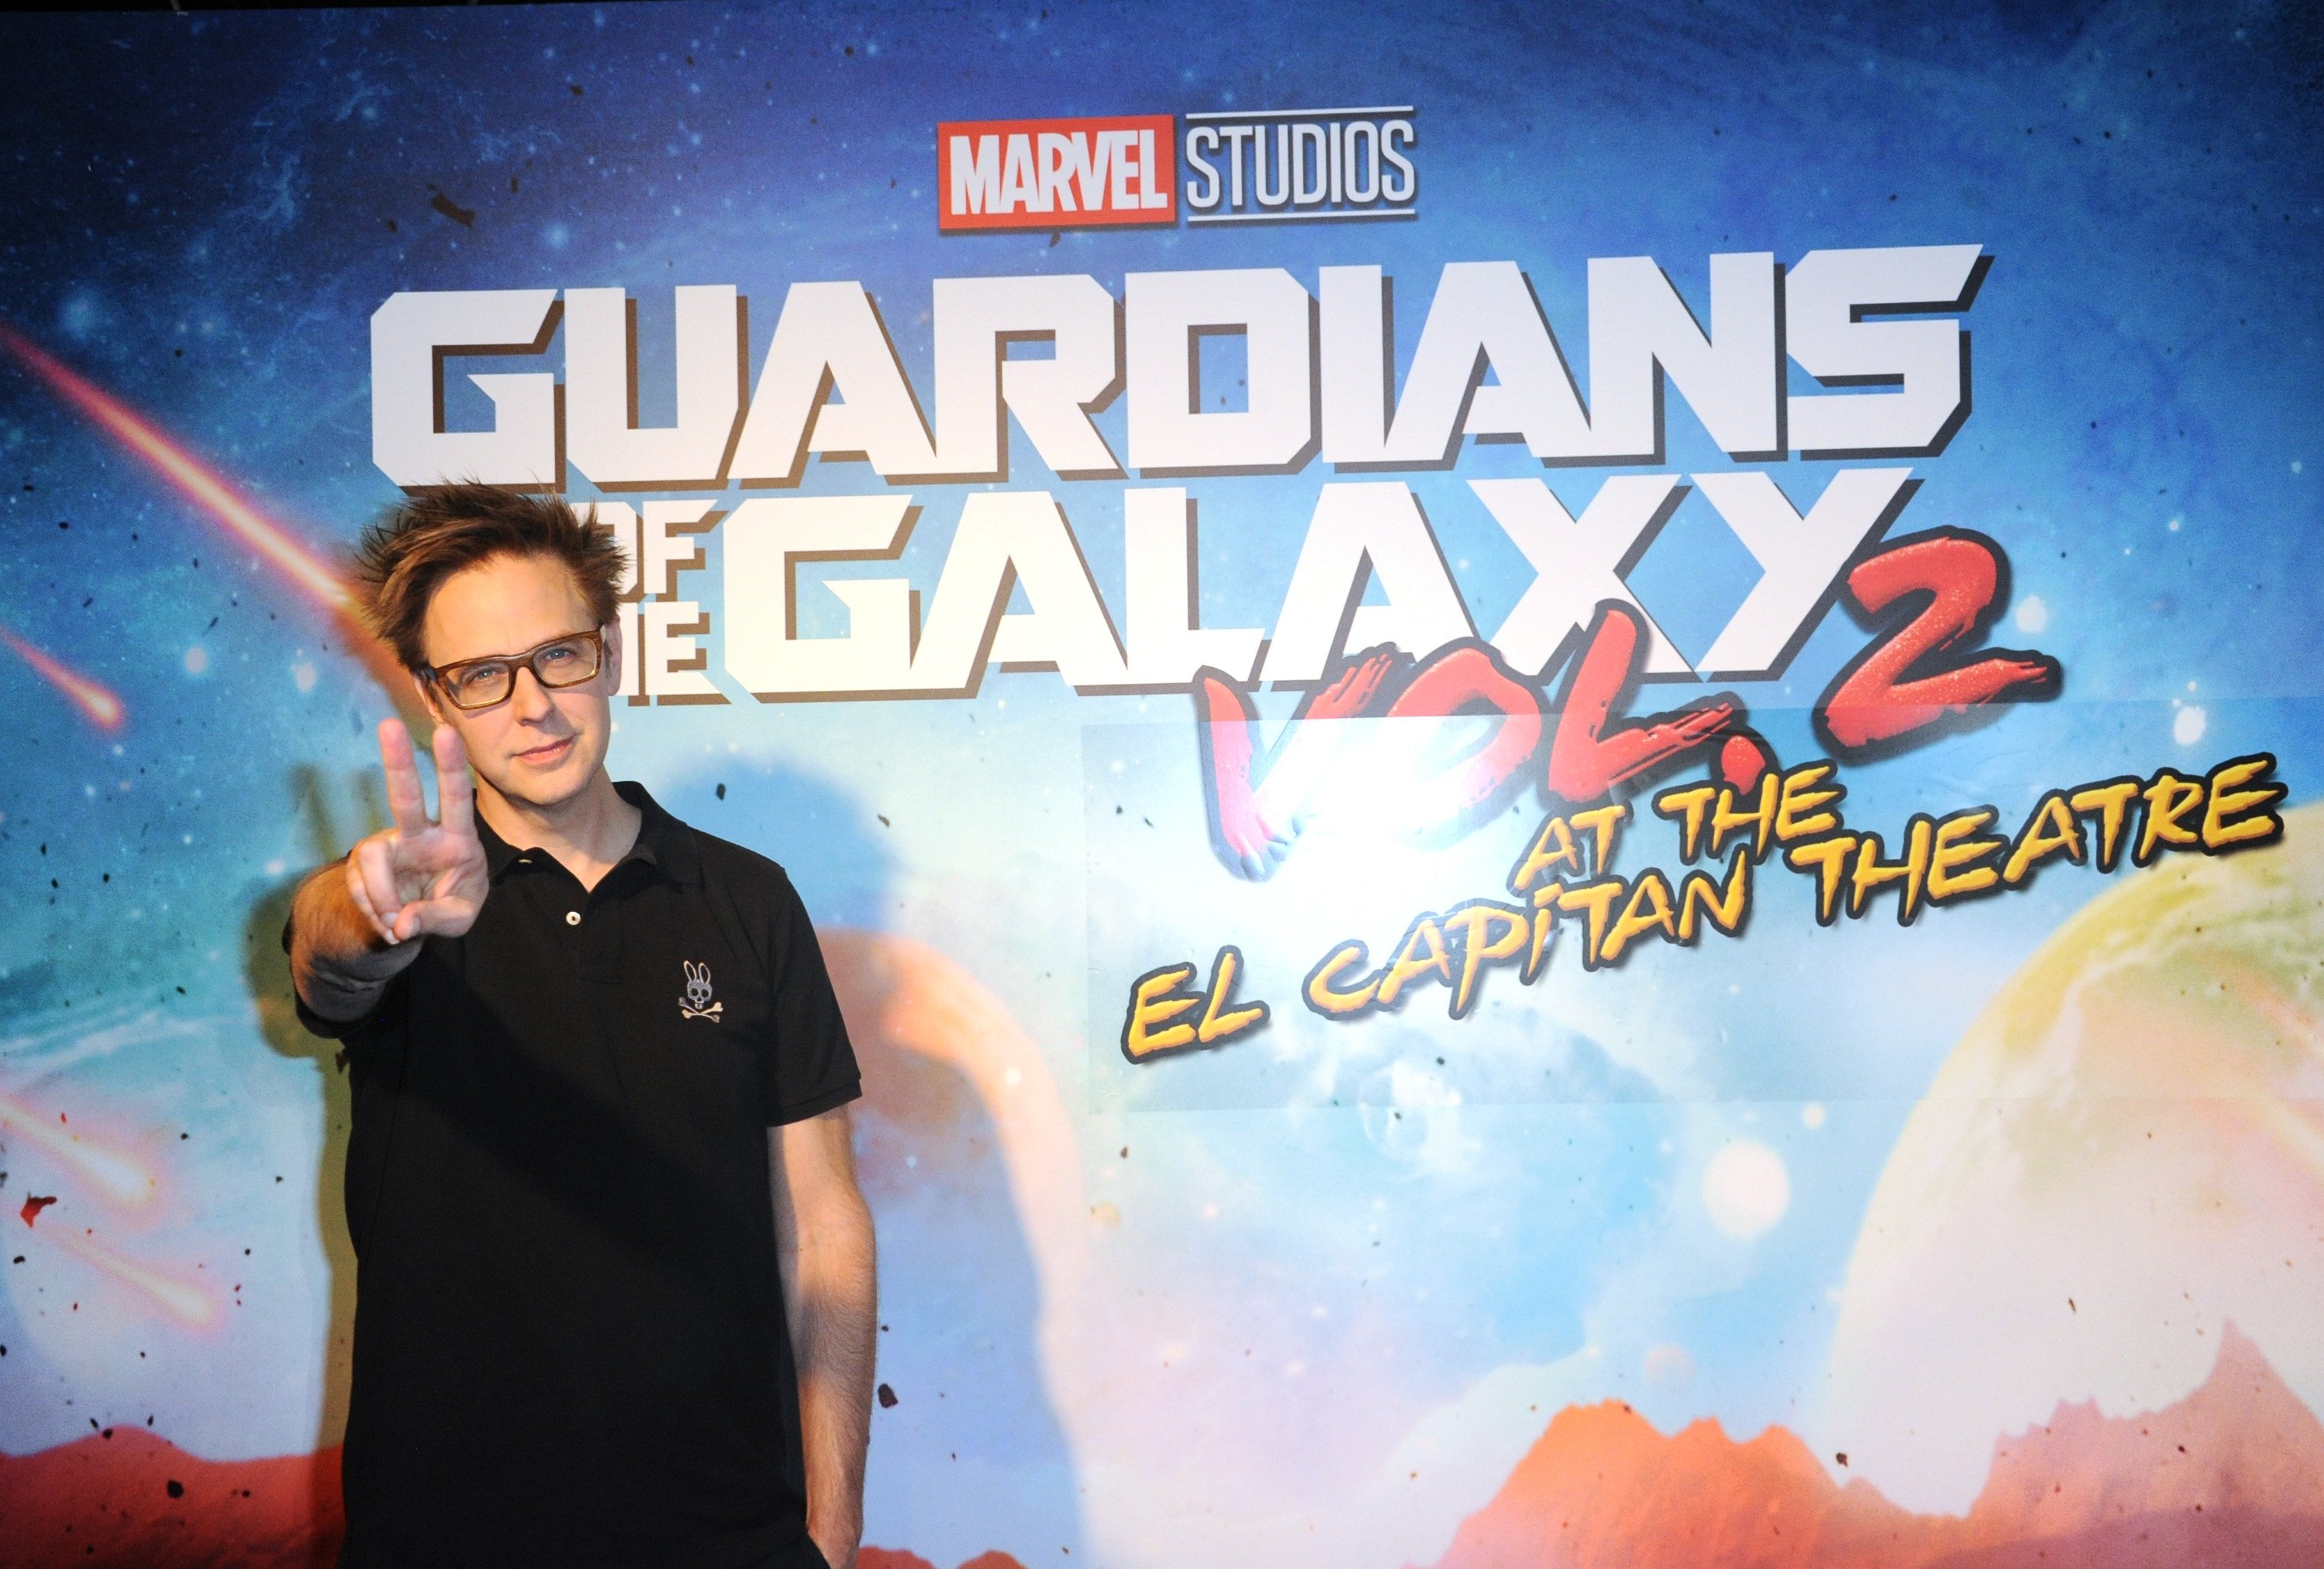 James Gunn at the El Capitan Theatre Hosts Screening Of Disney And Marvel Studios' 'Guardians Of The Galaxy Vol. 2' held on May 4, 2017 in Los Angeles, California.